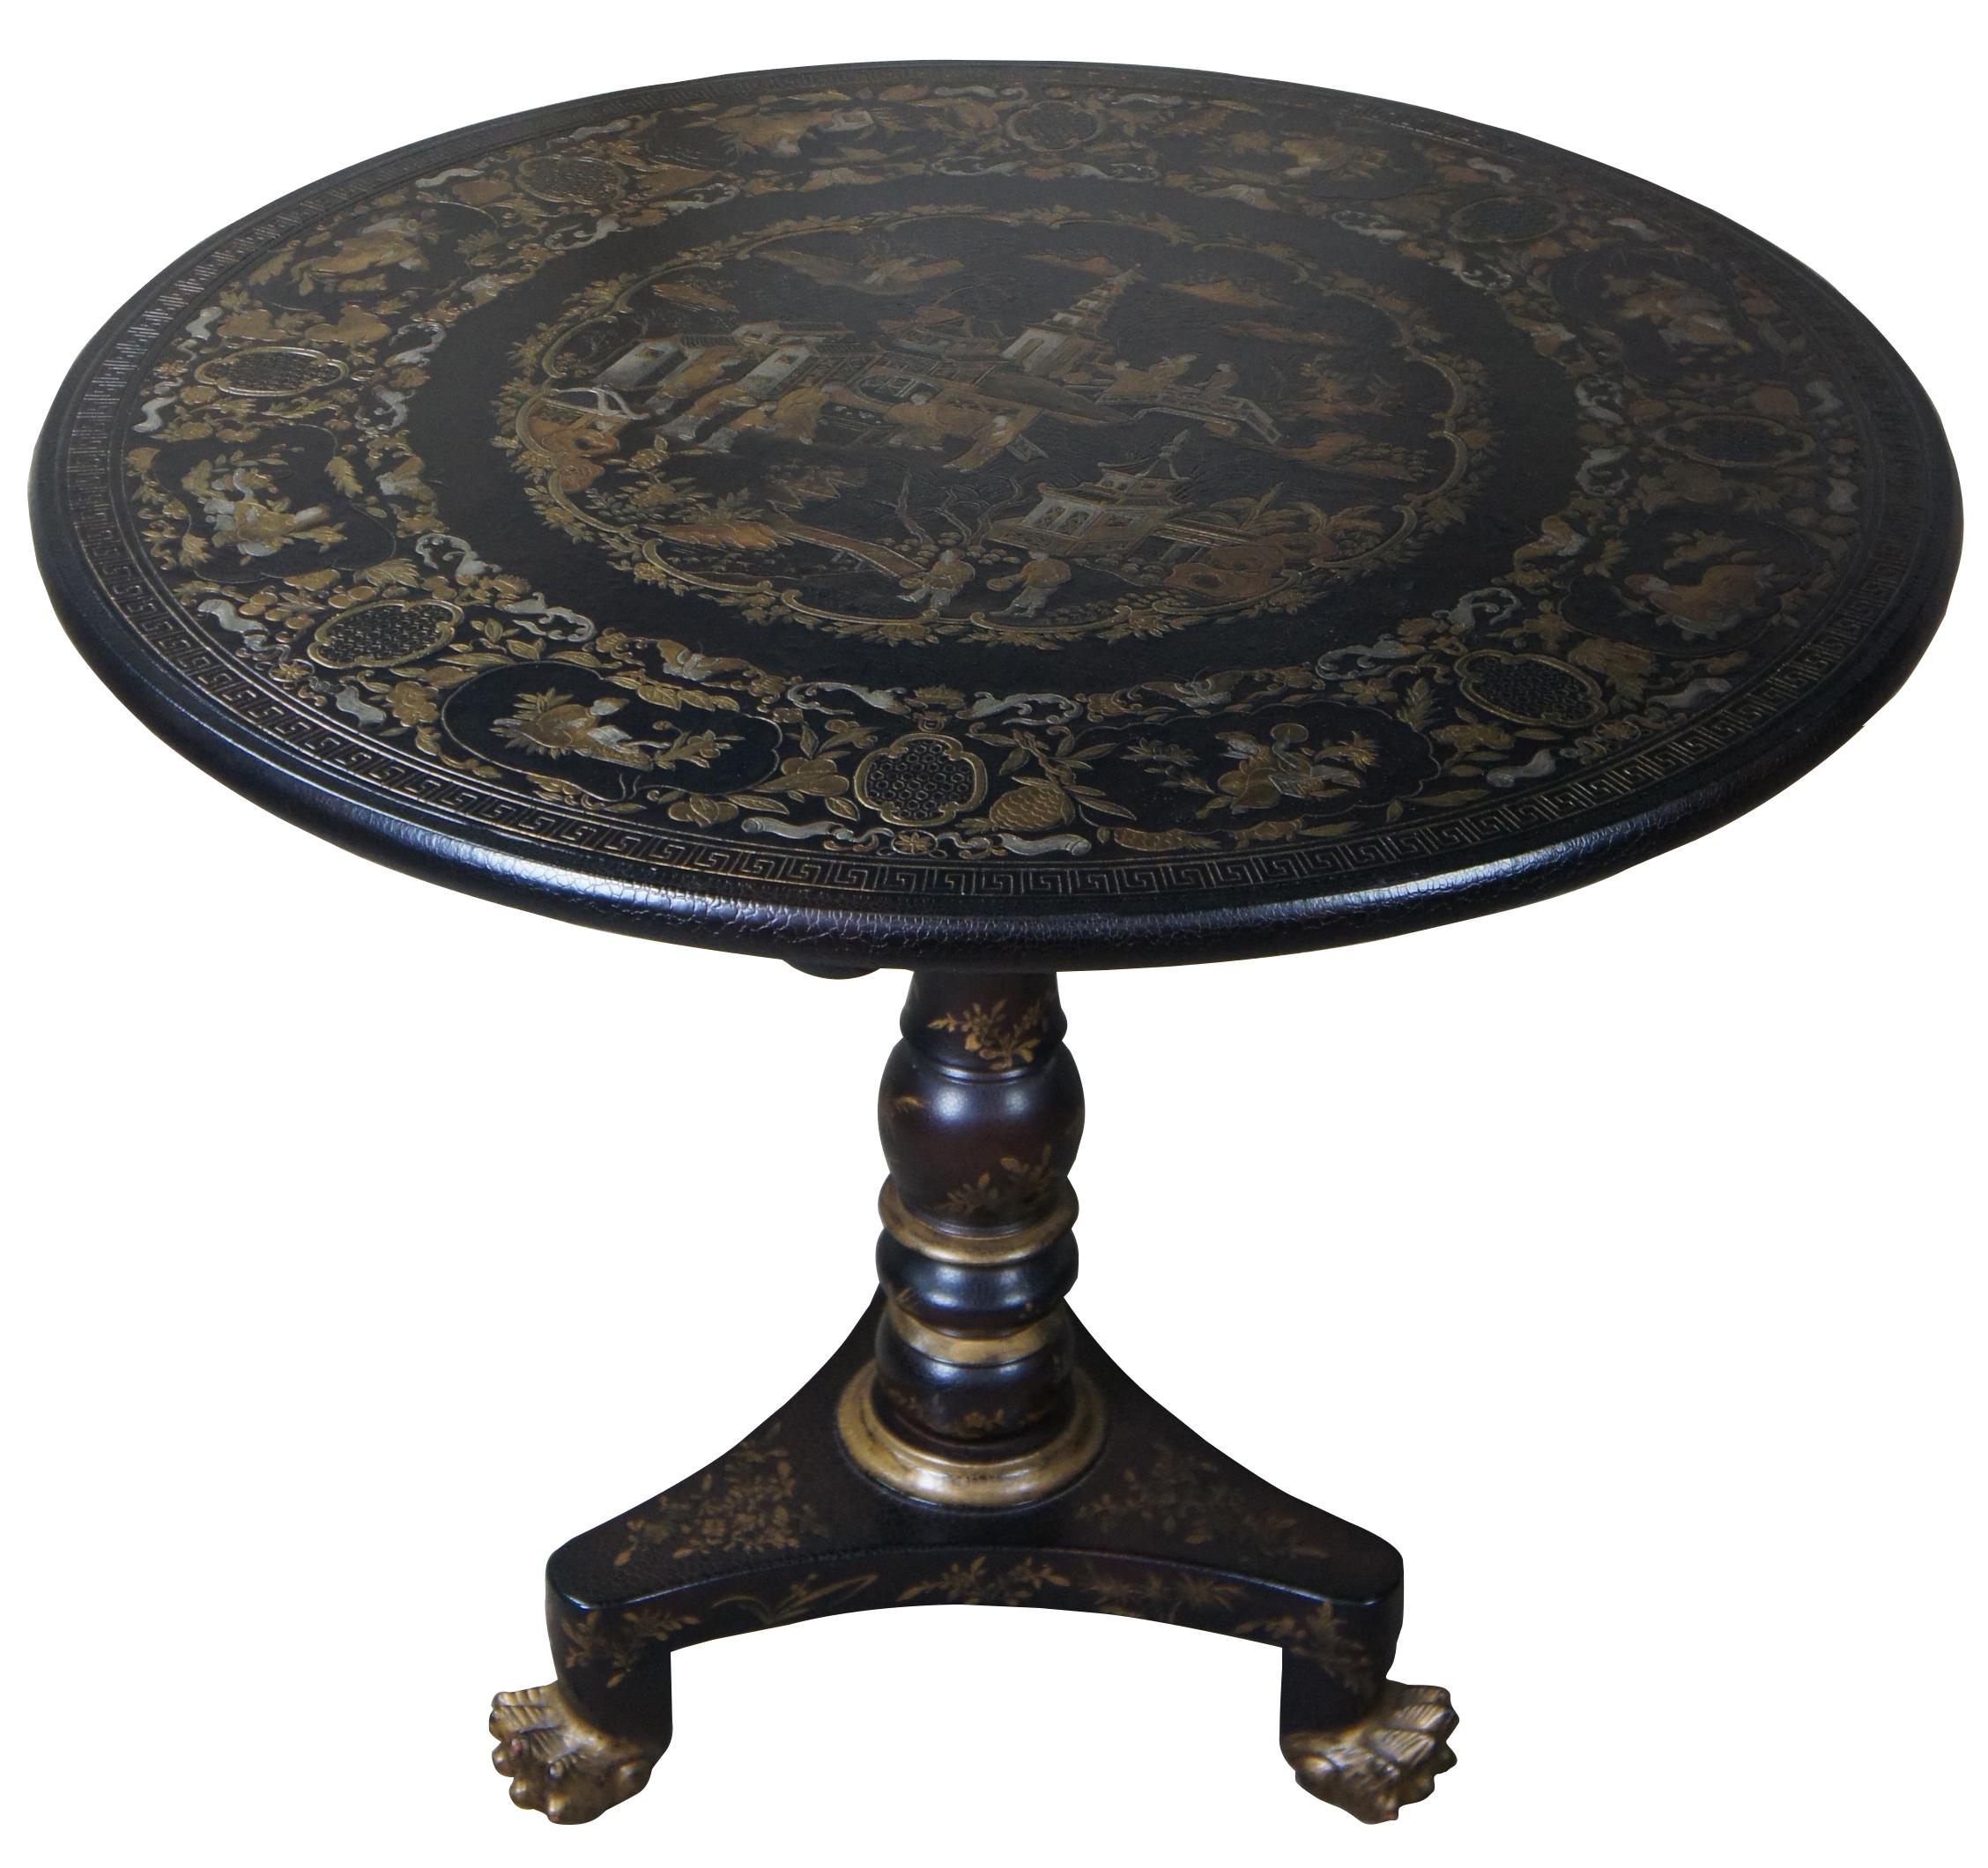 Baker Furniture Company Historic Charleston Japanned tilt-top tea table, in the Regency or Empire style. Features a circular top with embossed gilt landscape and figural decoration, a secondary band of embossed gilt foliate and figural vignette